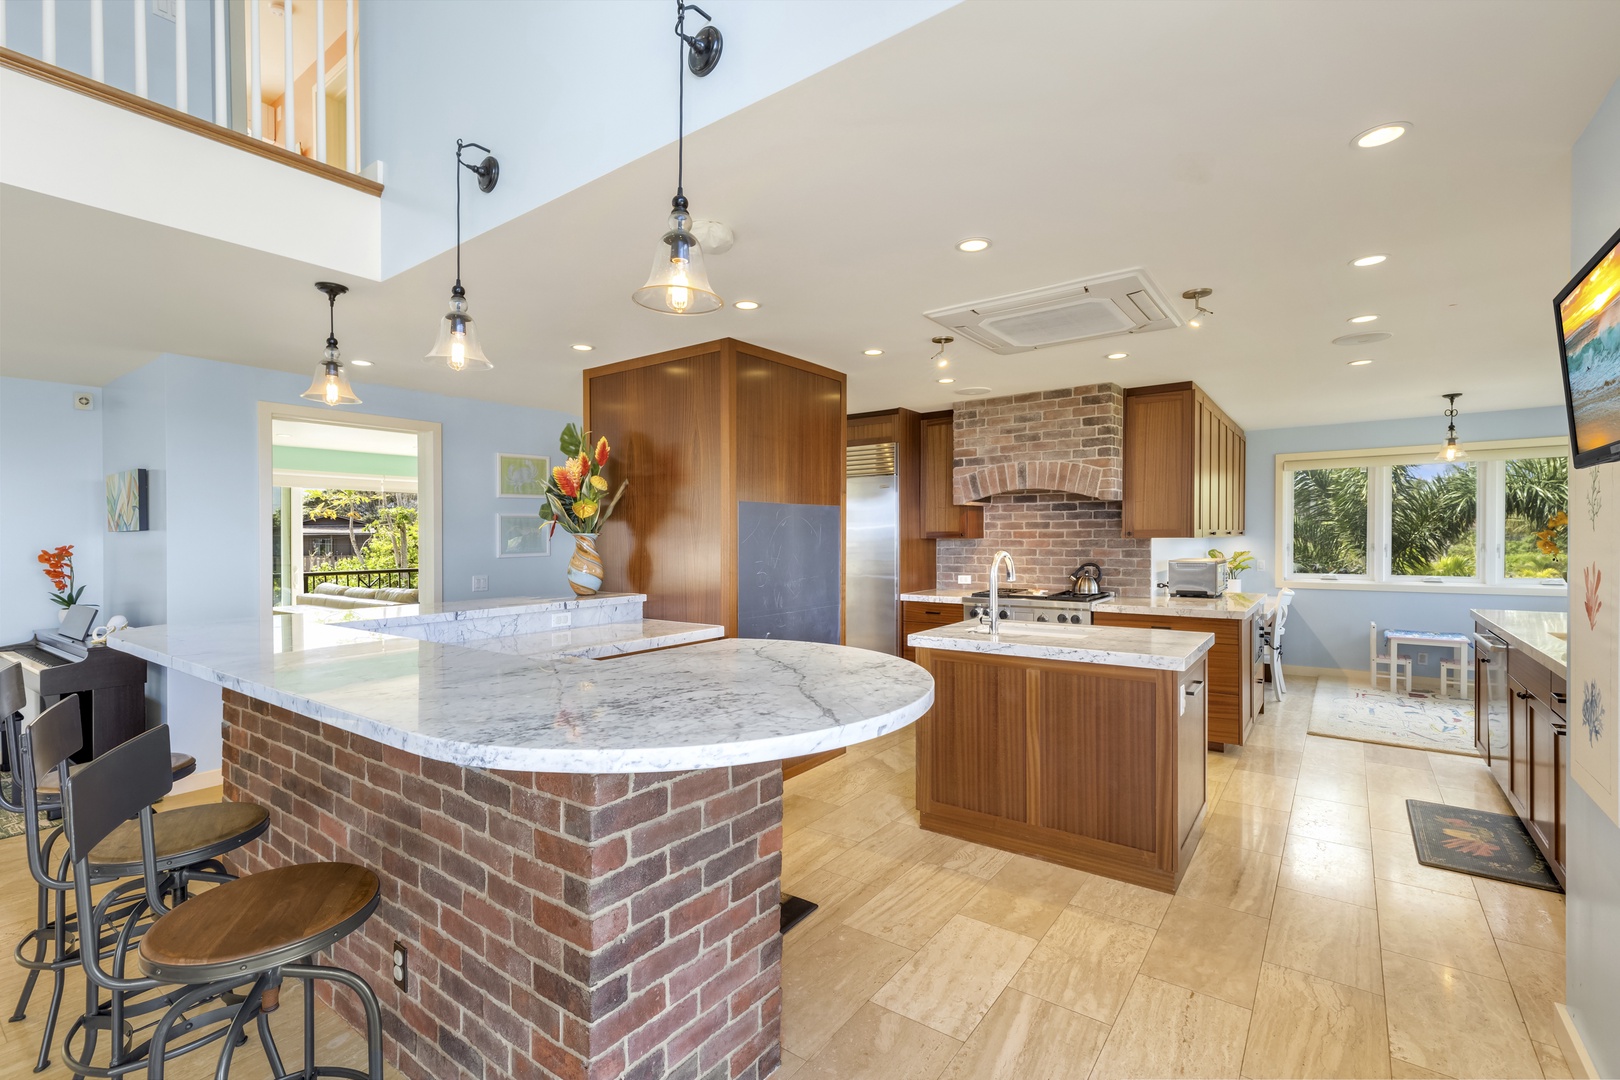 Waialua Vacation Rentals, Kala'iku Estate - The open kitchen at Kala`iku has extensive counter space, two sinks, high-quality stainless steel appliances, and bar seating, making it easy to enjoy meals at home